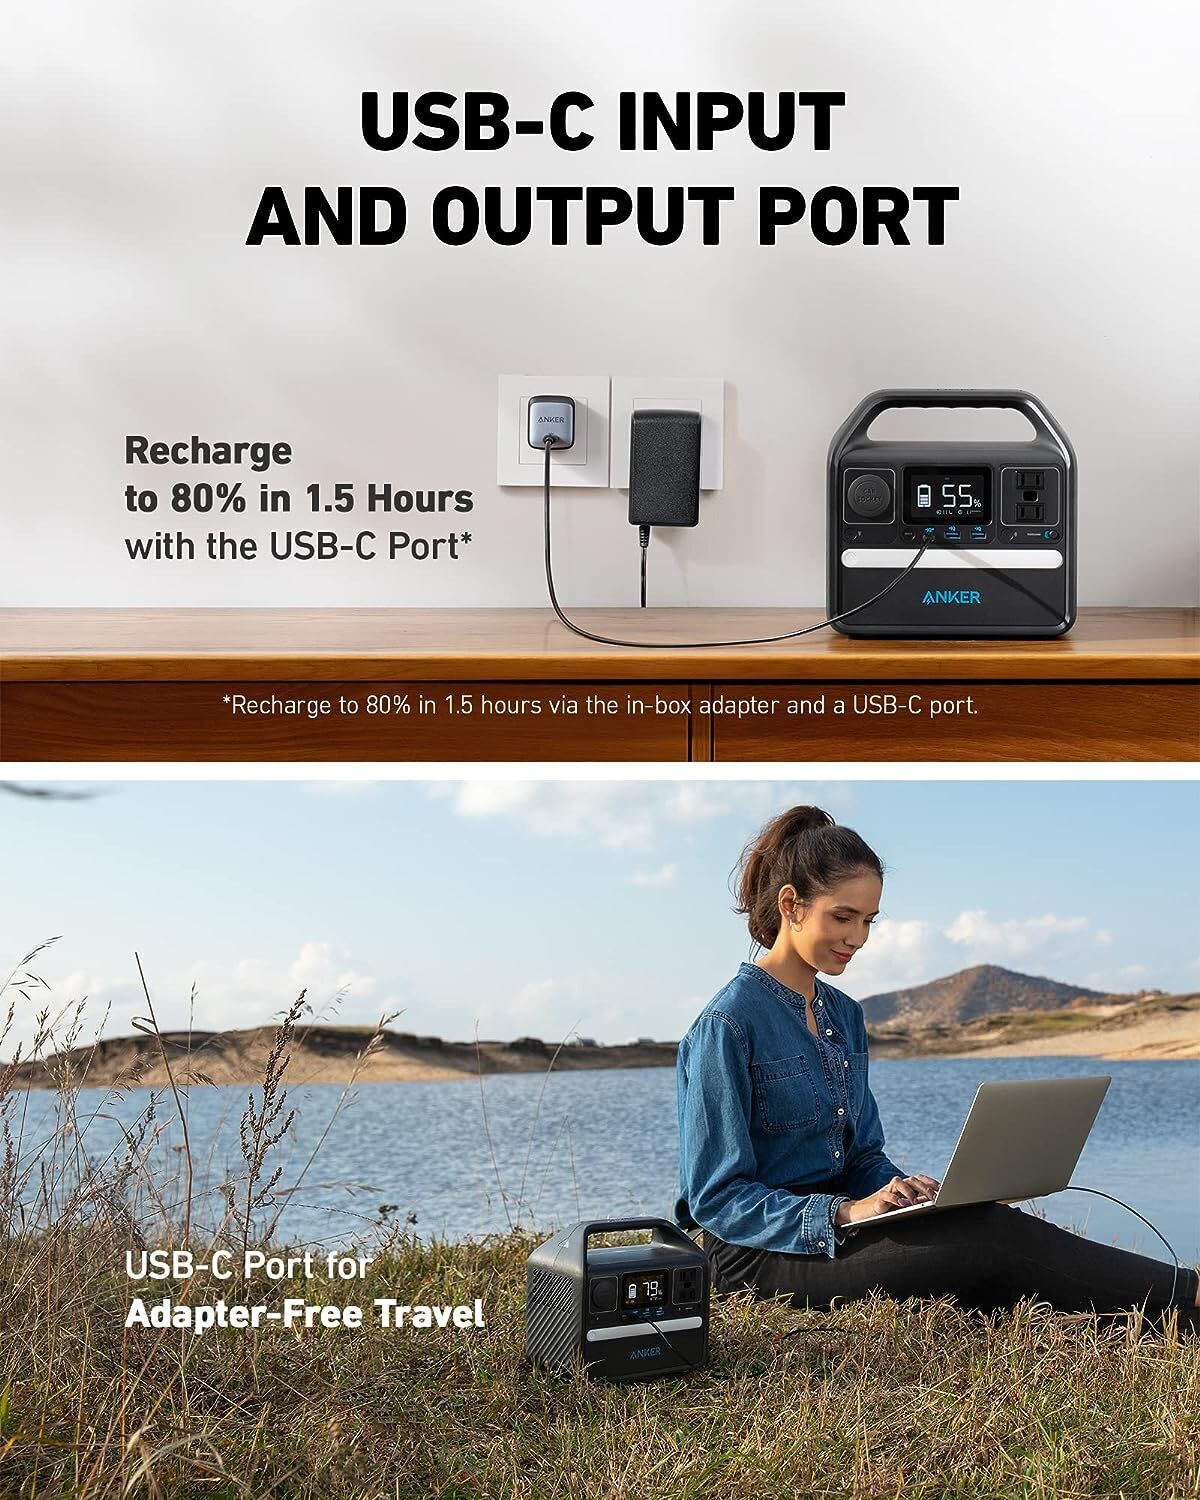 Anker Play Anker 521 Portable Power Station 256Wh Solar Generator 200W 6-Ports Power Bank